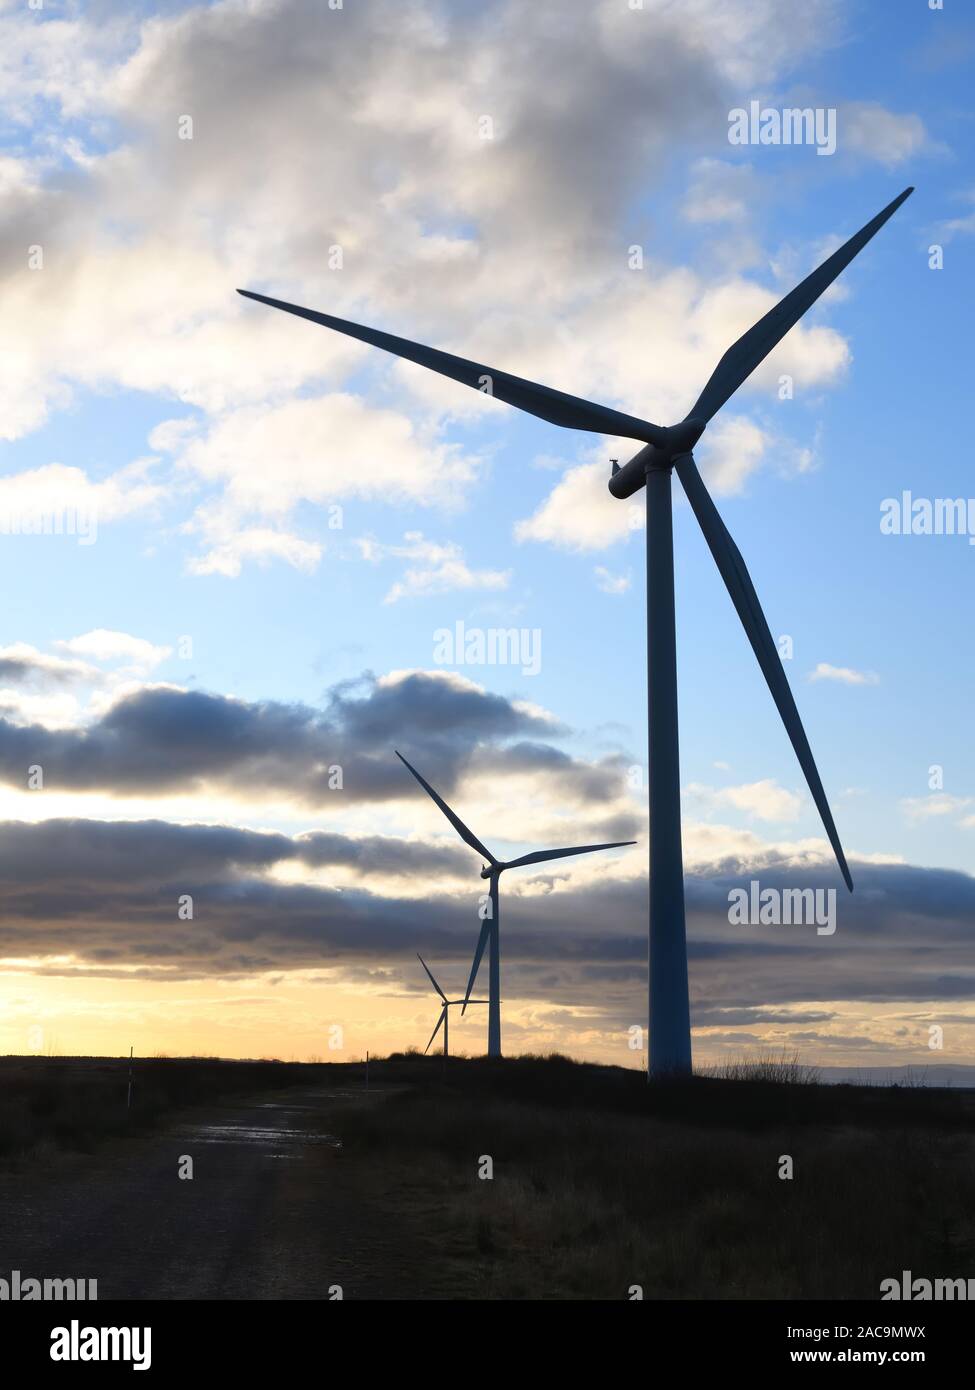 Scottish Power turbines at sunset at Whitelee windfarm on the Eaglesham Moor which is the largest onshore windfarm in Britain, in Scotland, UK, Europe Stock Photo